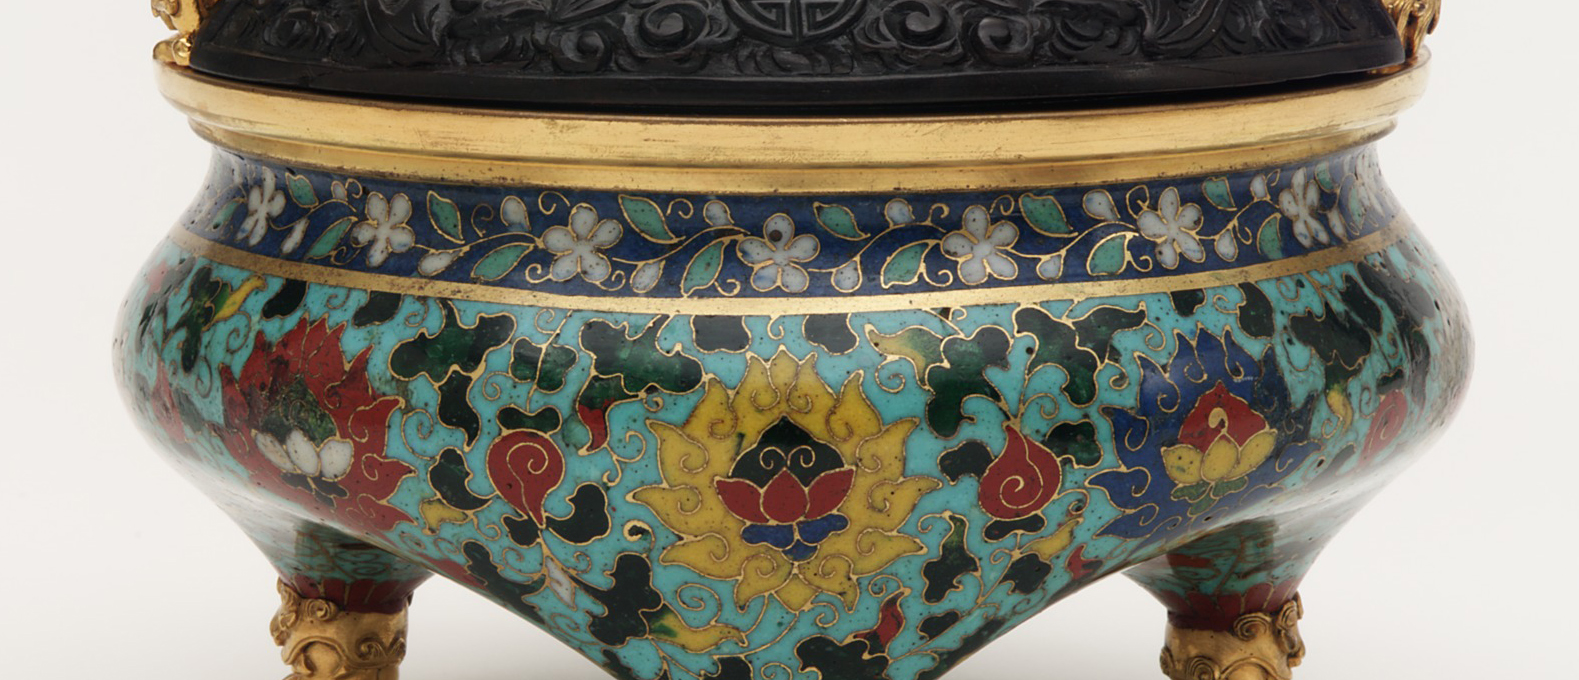 detail of multi-colored vessel